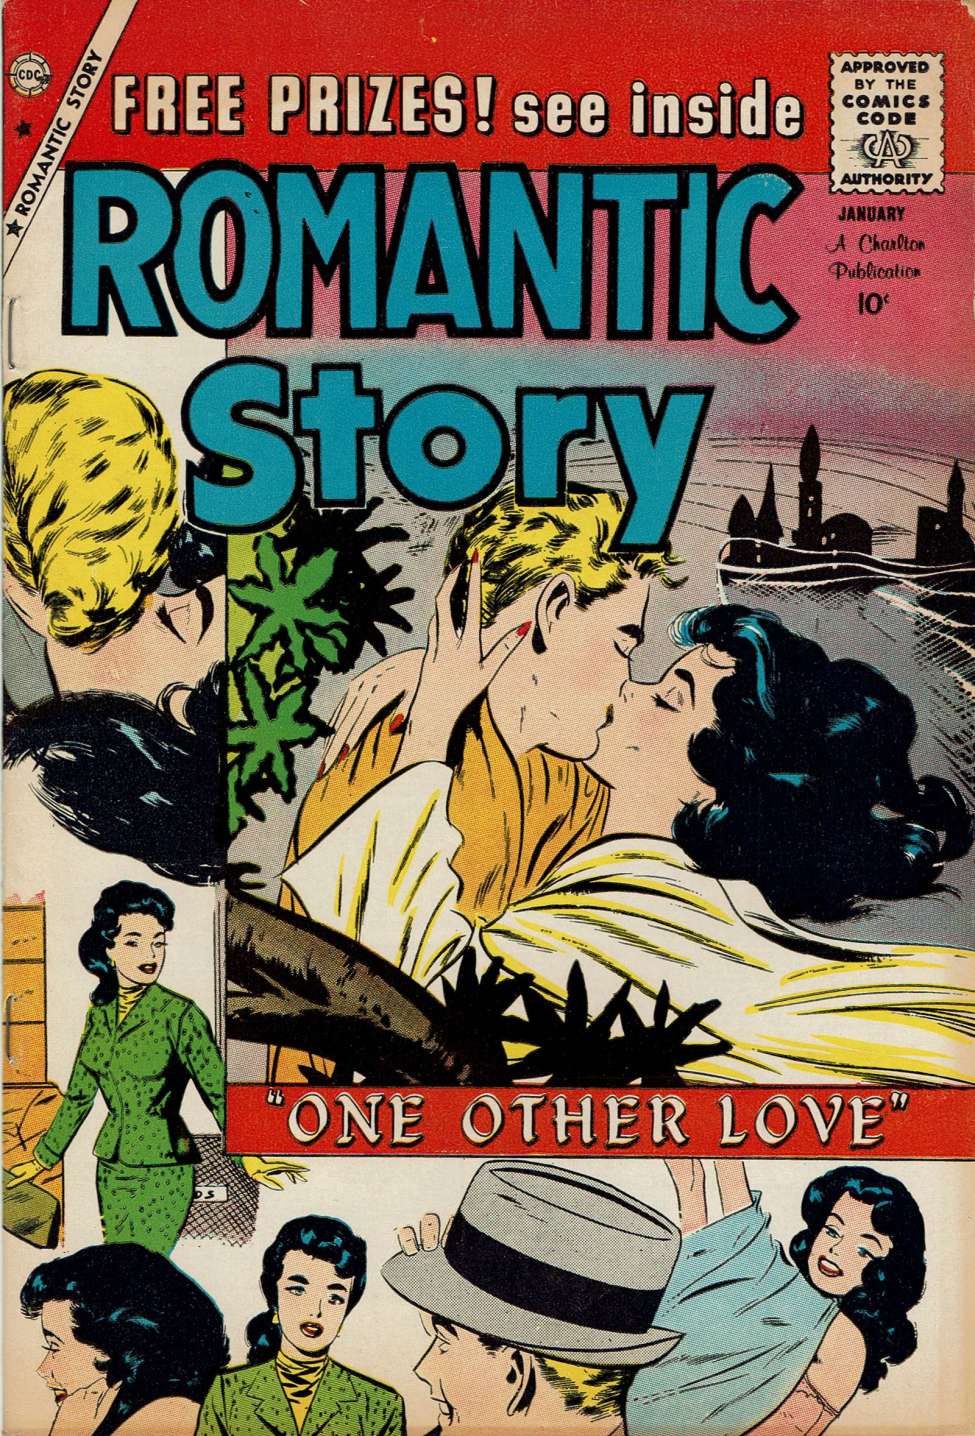 Book Cover For Romantic Story 47